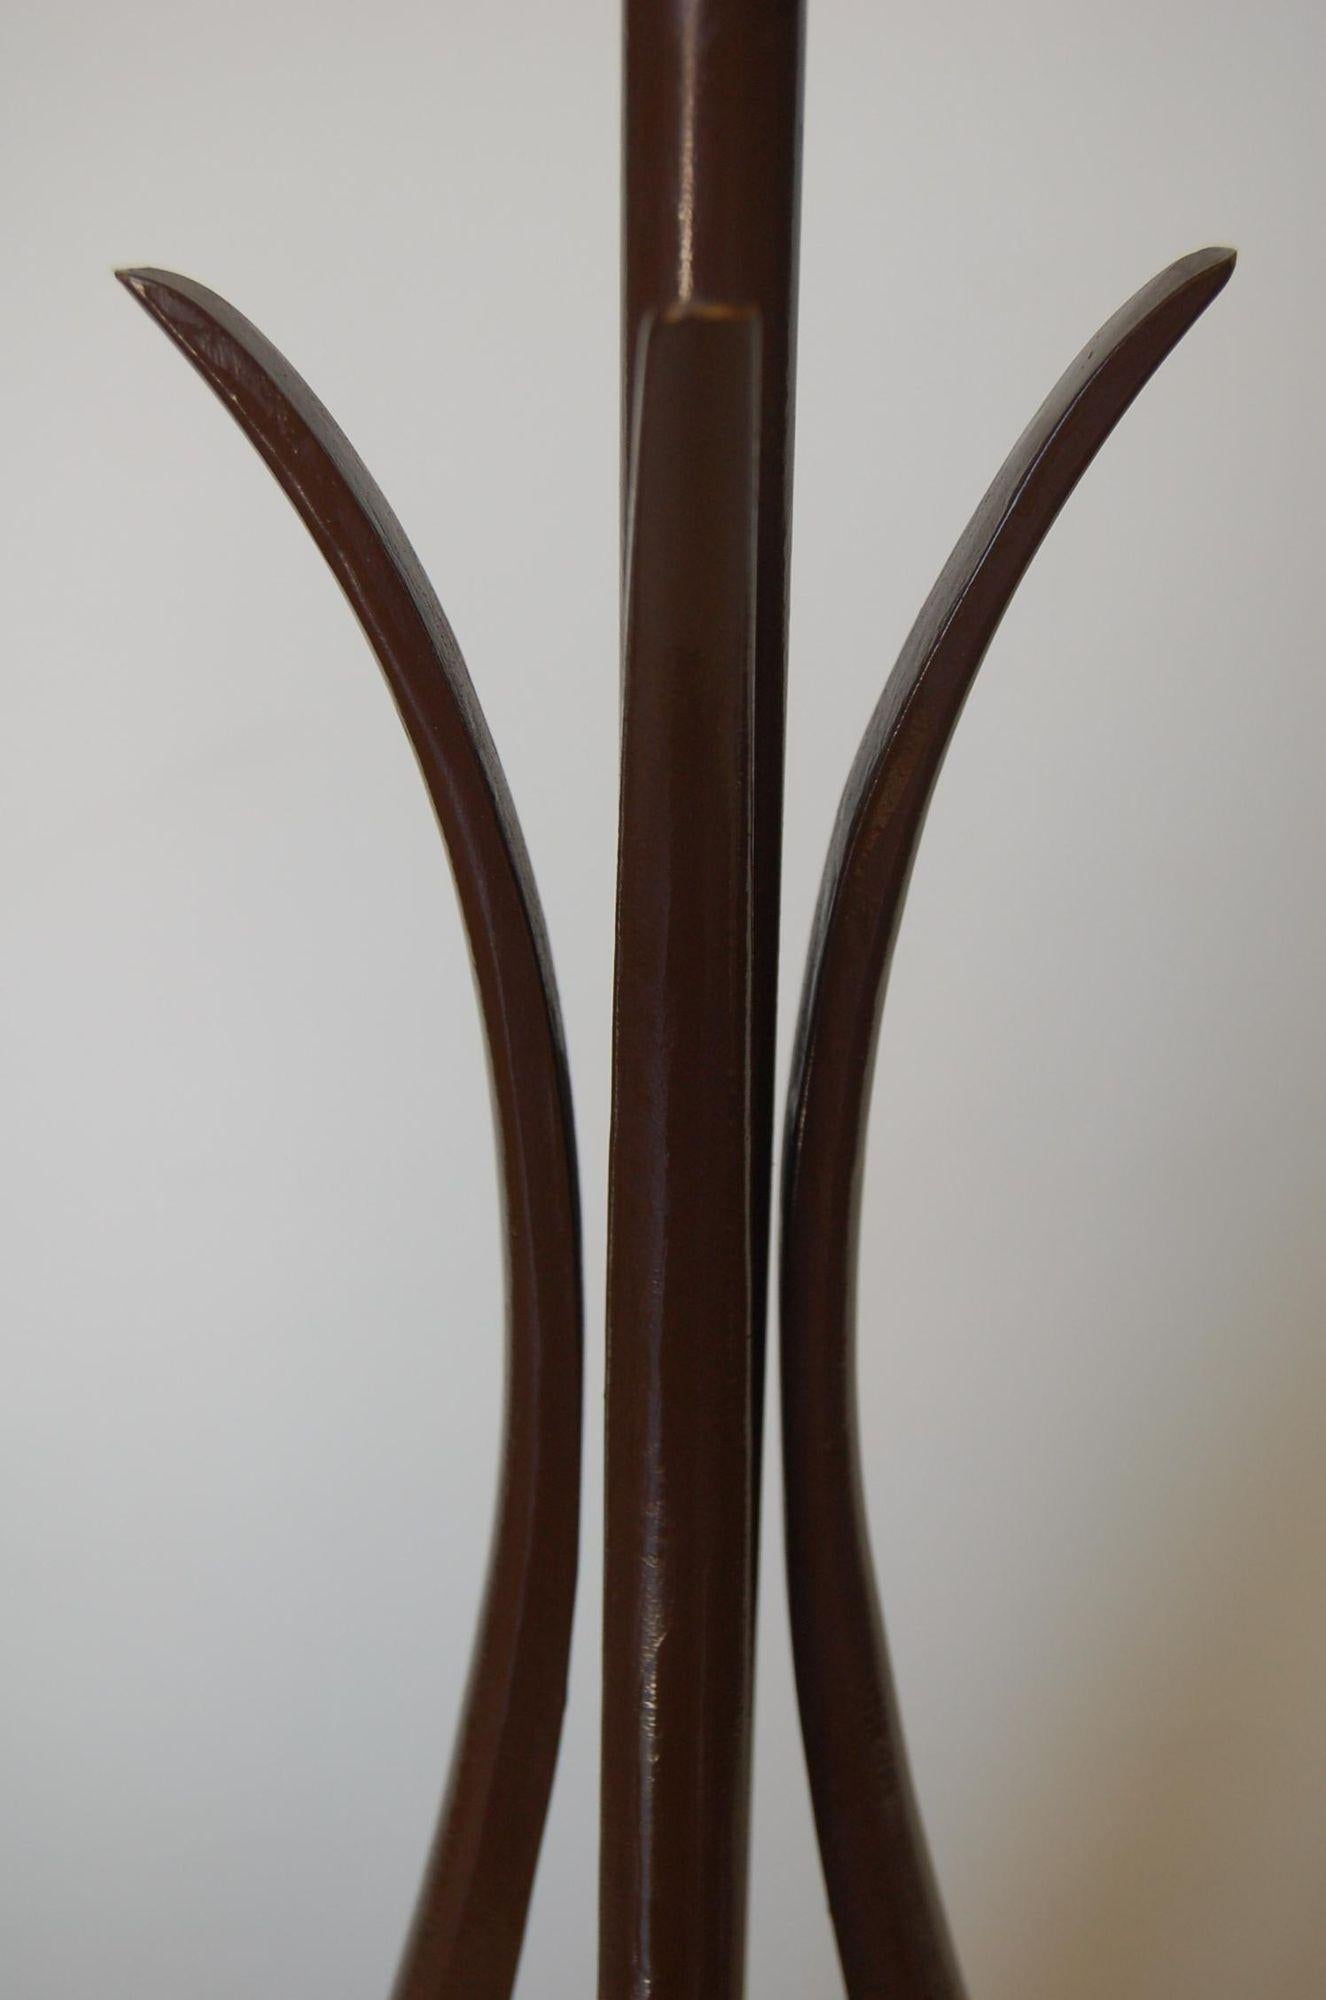 American Modernist Harp Shaped Sculptural Walnut and Brass Tone Table Lamp, Pair For Sale